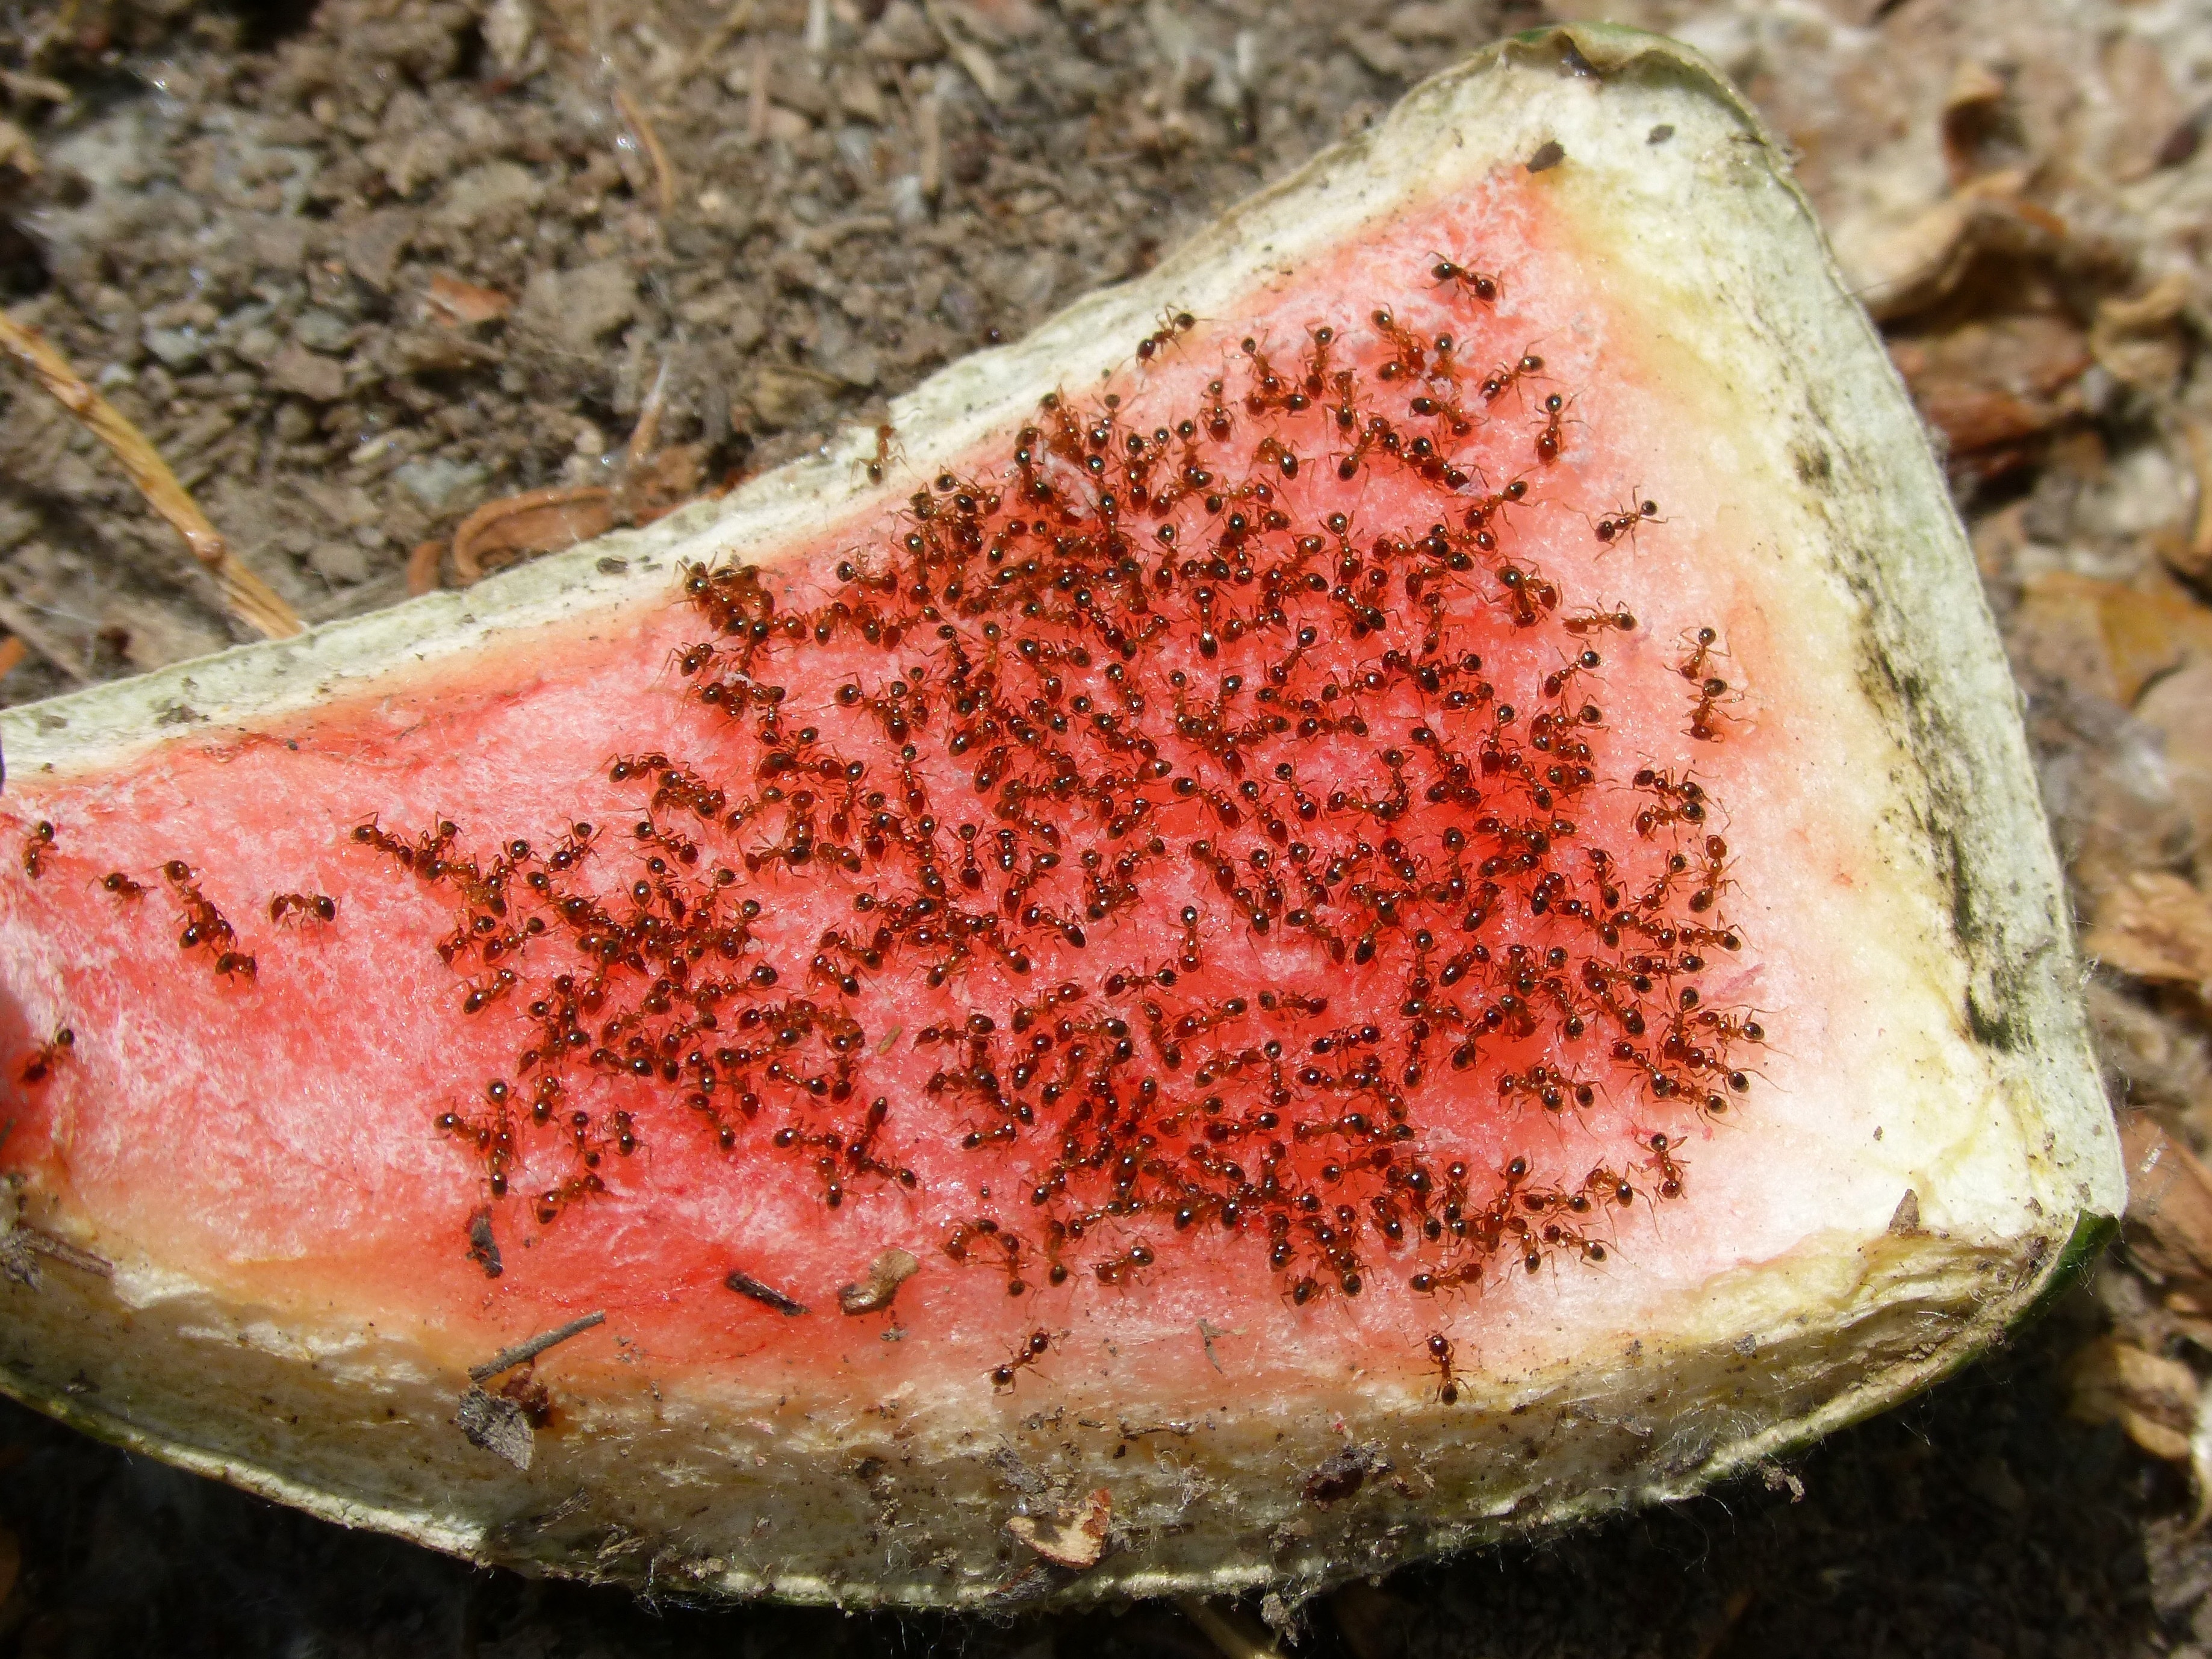 watermelon sliced with swarm of red ants